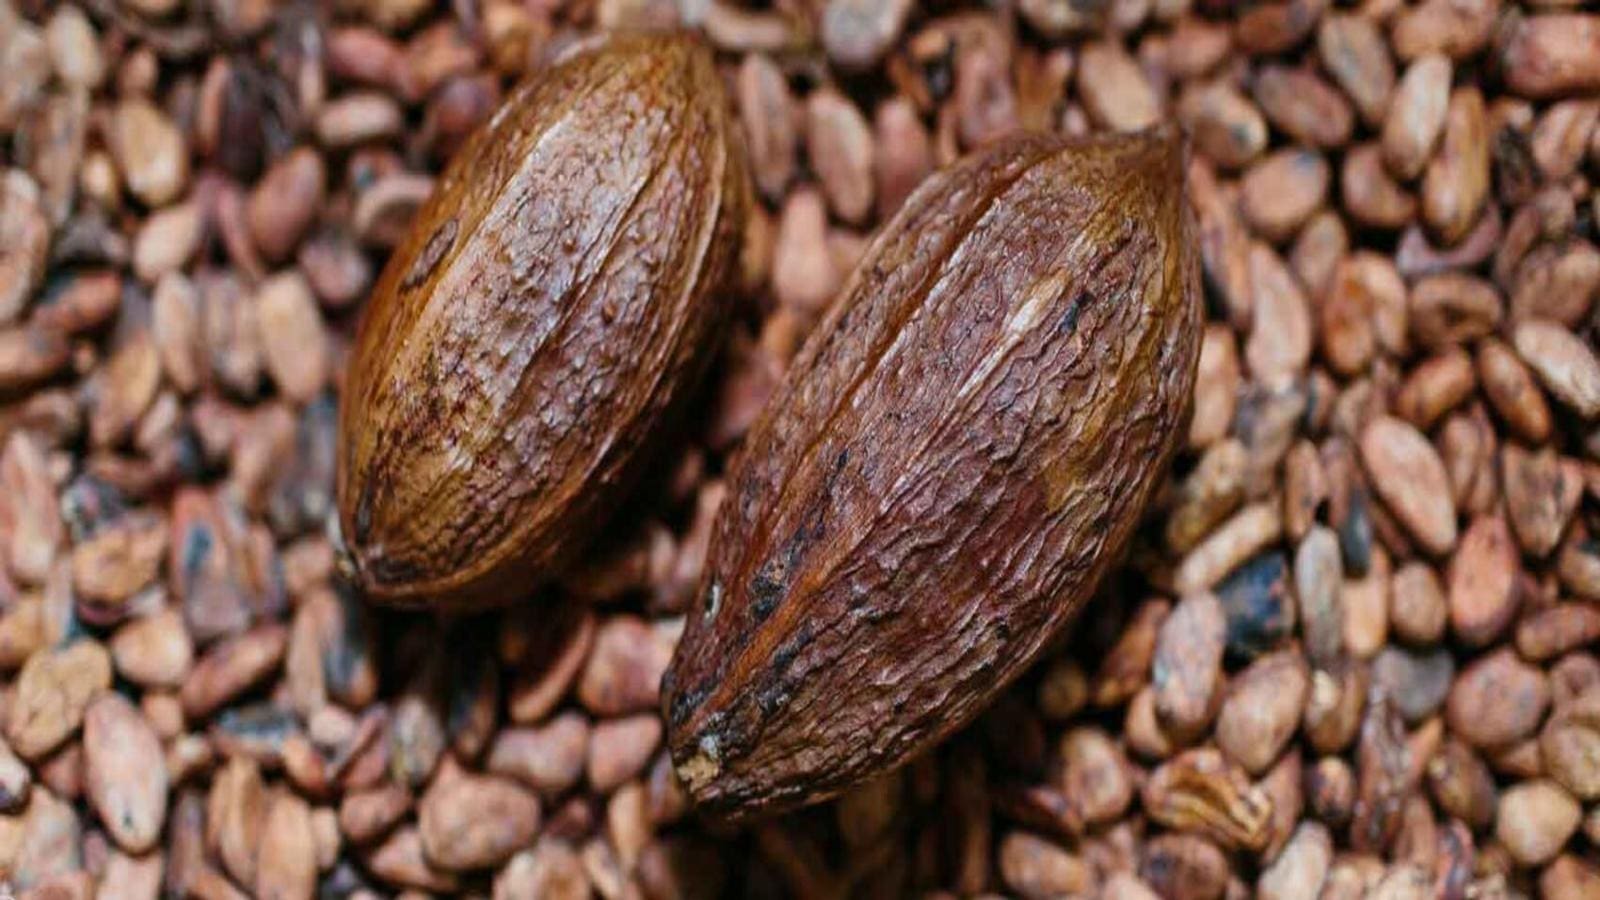 Cargill partners AeroFarms to develop climate resilient cocoa varieties